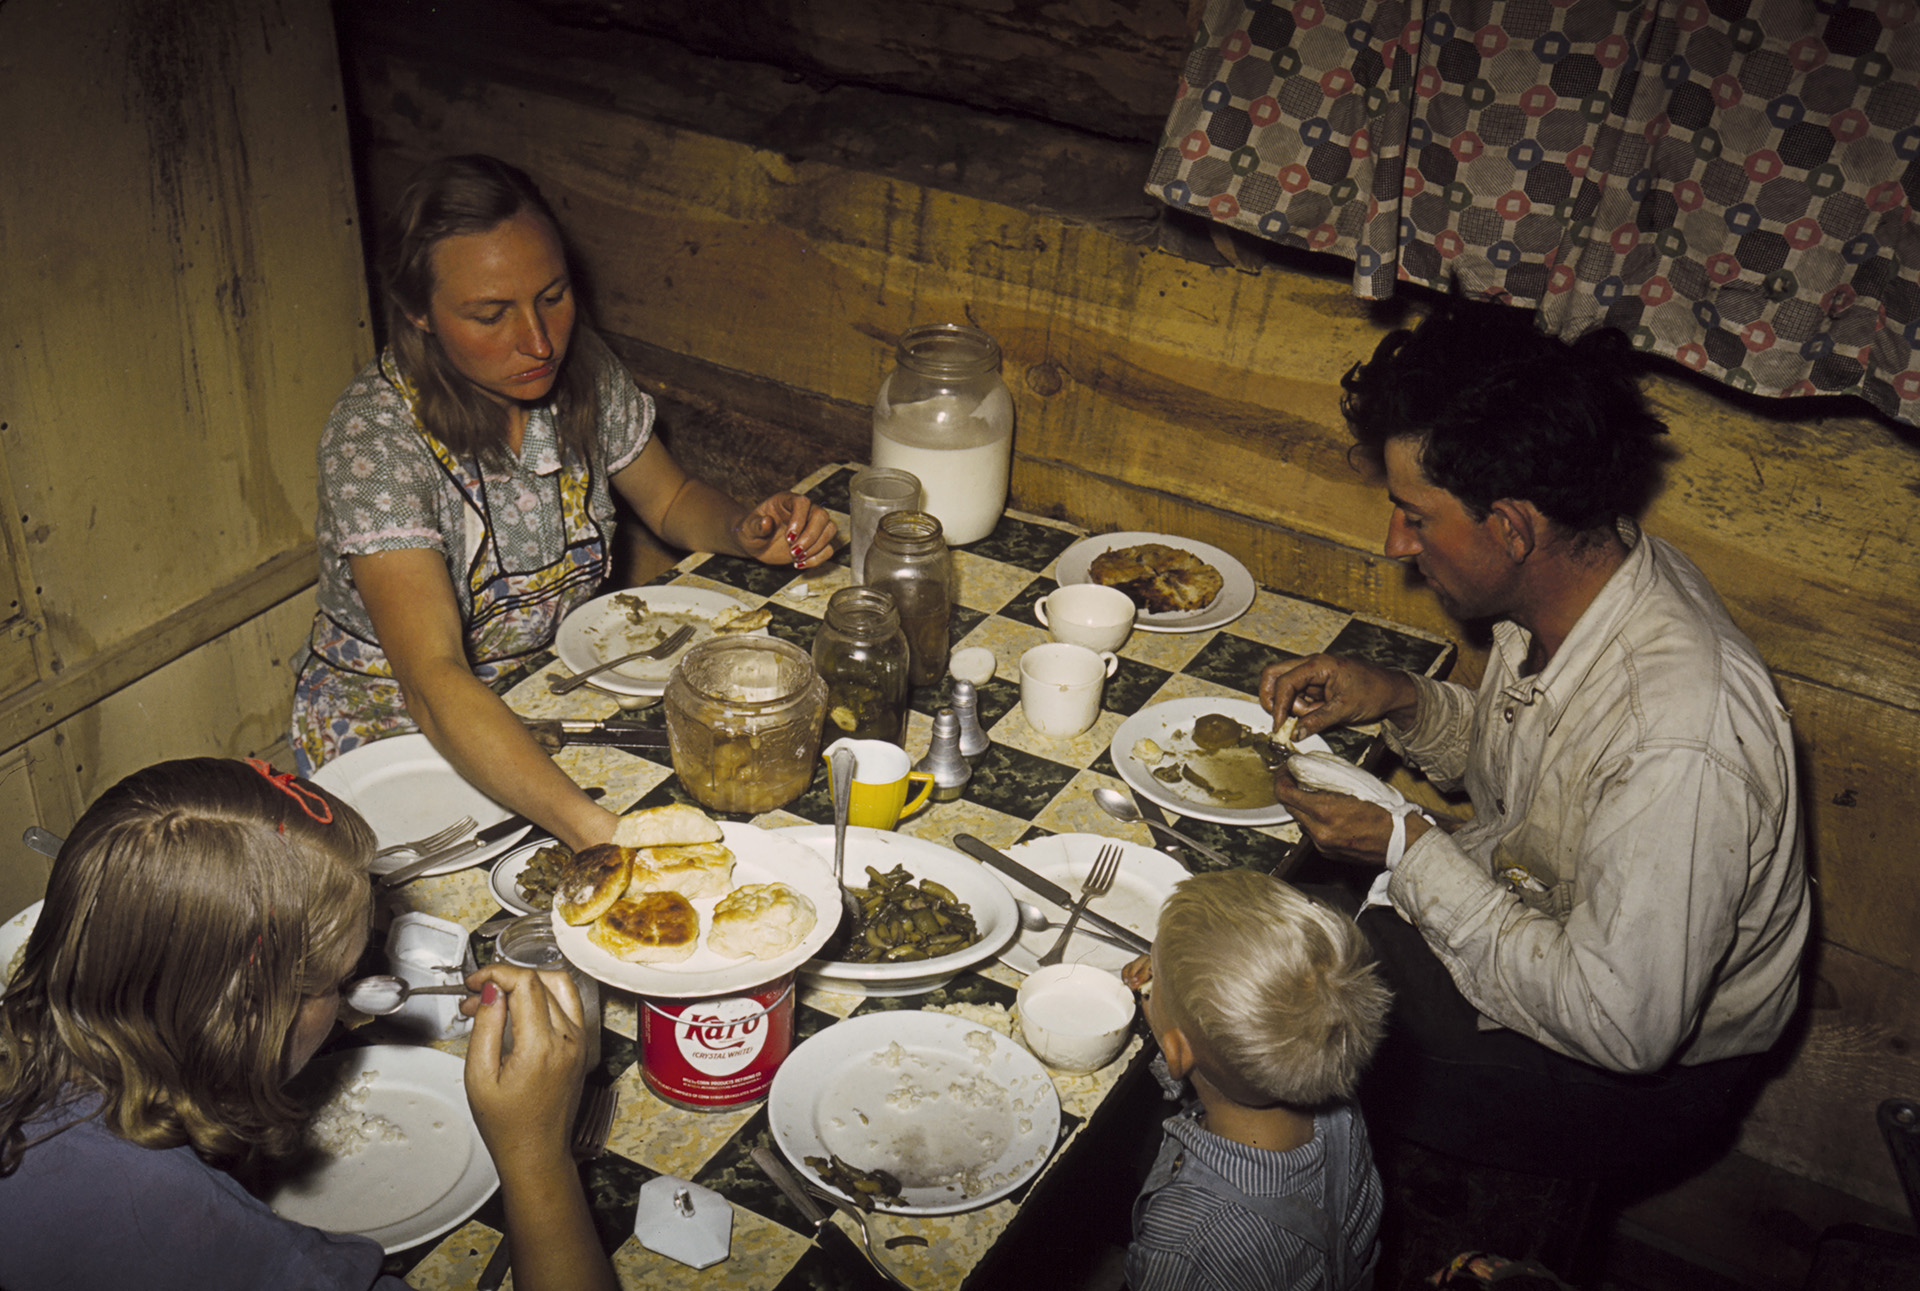 Russell Lee The Faro Caudill Family Eating Dinner in Their Dugout, Pie Town, New Mexico, 1940 Courtesy The Library of Congress Prints and Photographs Division